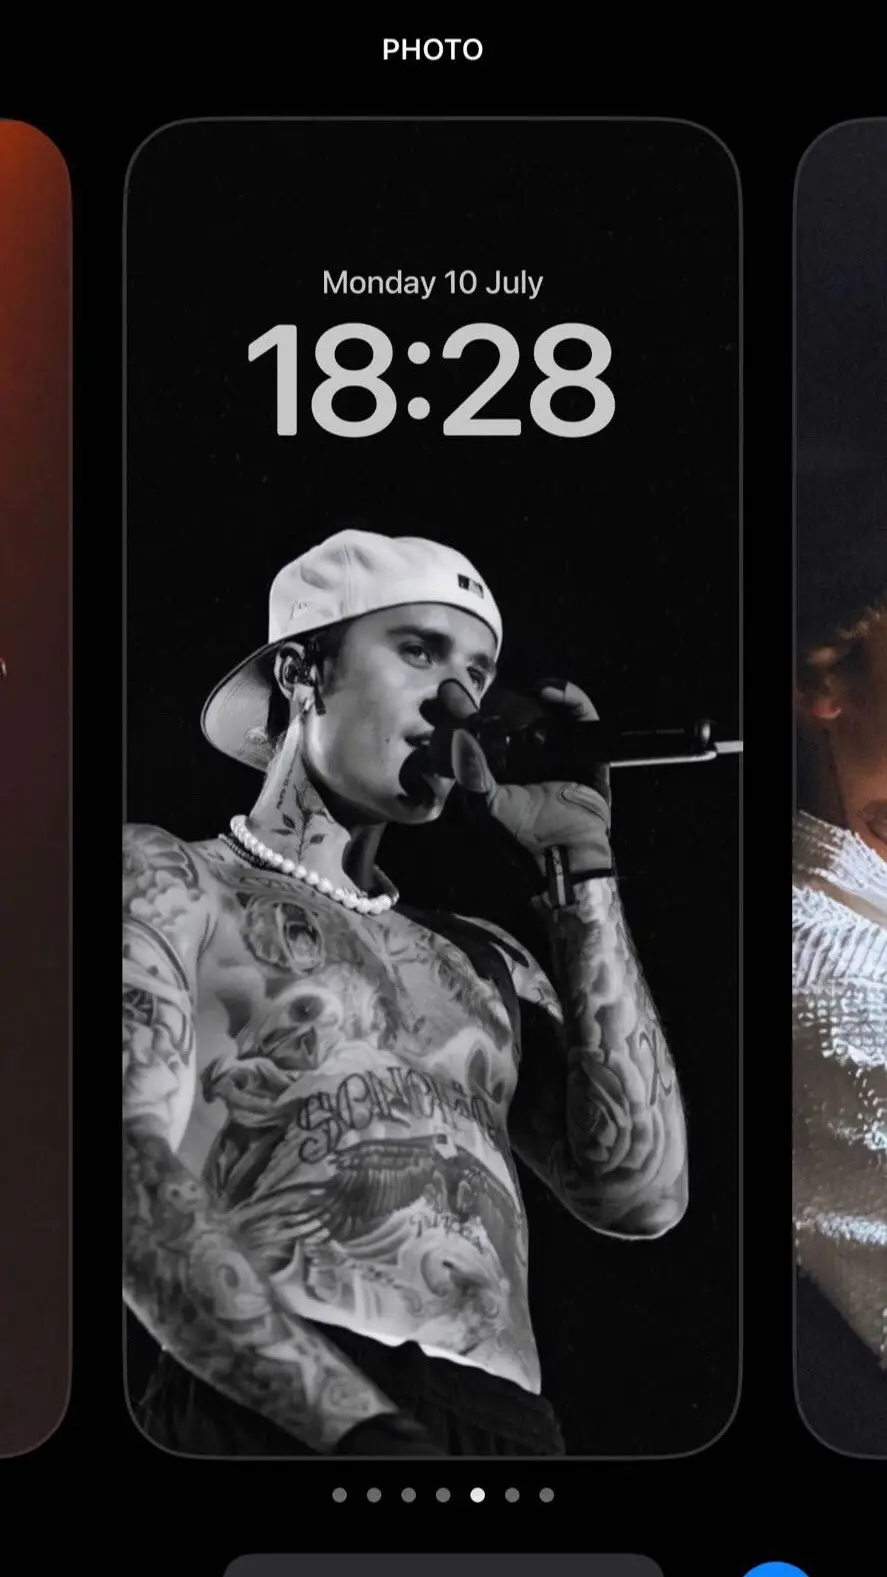 #wallpaper #justinbieber #fyp #fy #foryou #fyppppppppppppppppppppppp 